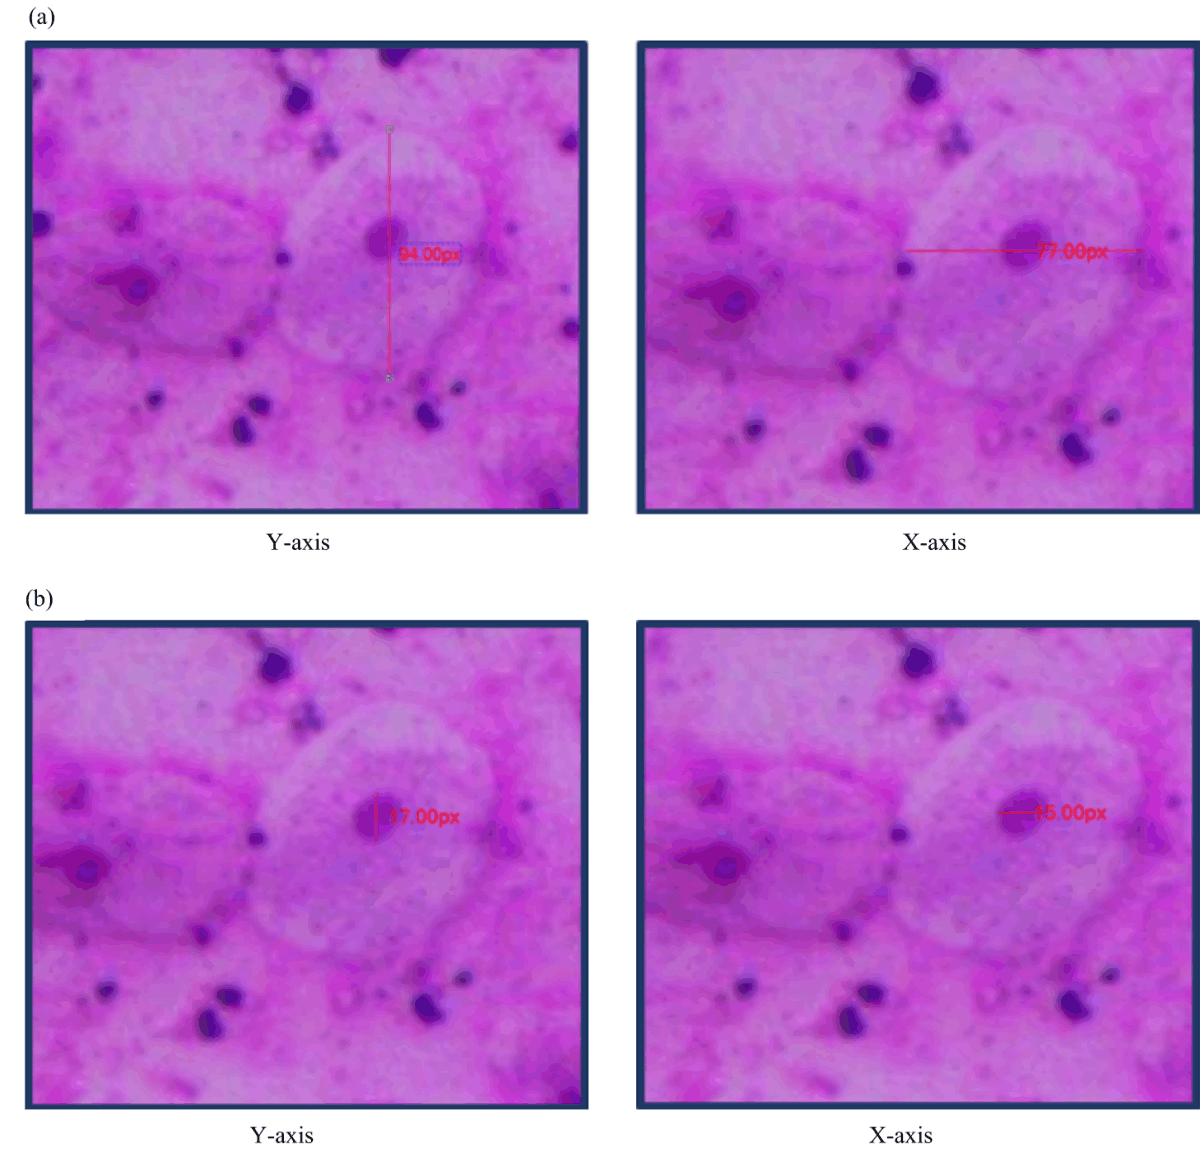 Image for - Evaluation of Exfoliated Buccal Mucosal Cells from Snuff Dealers: A Quantitative Cytomorphometric Analysis